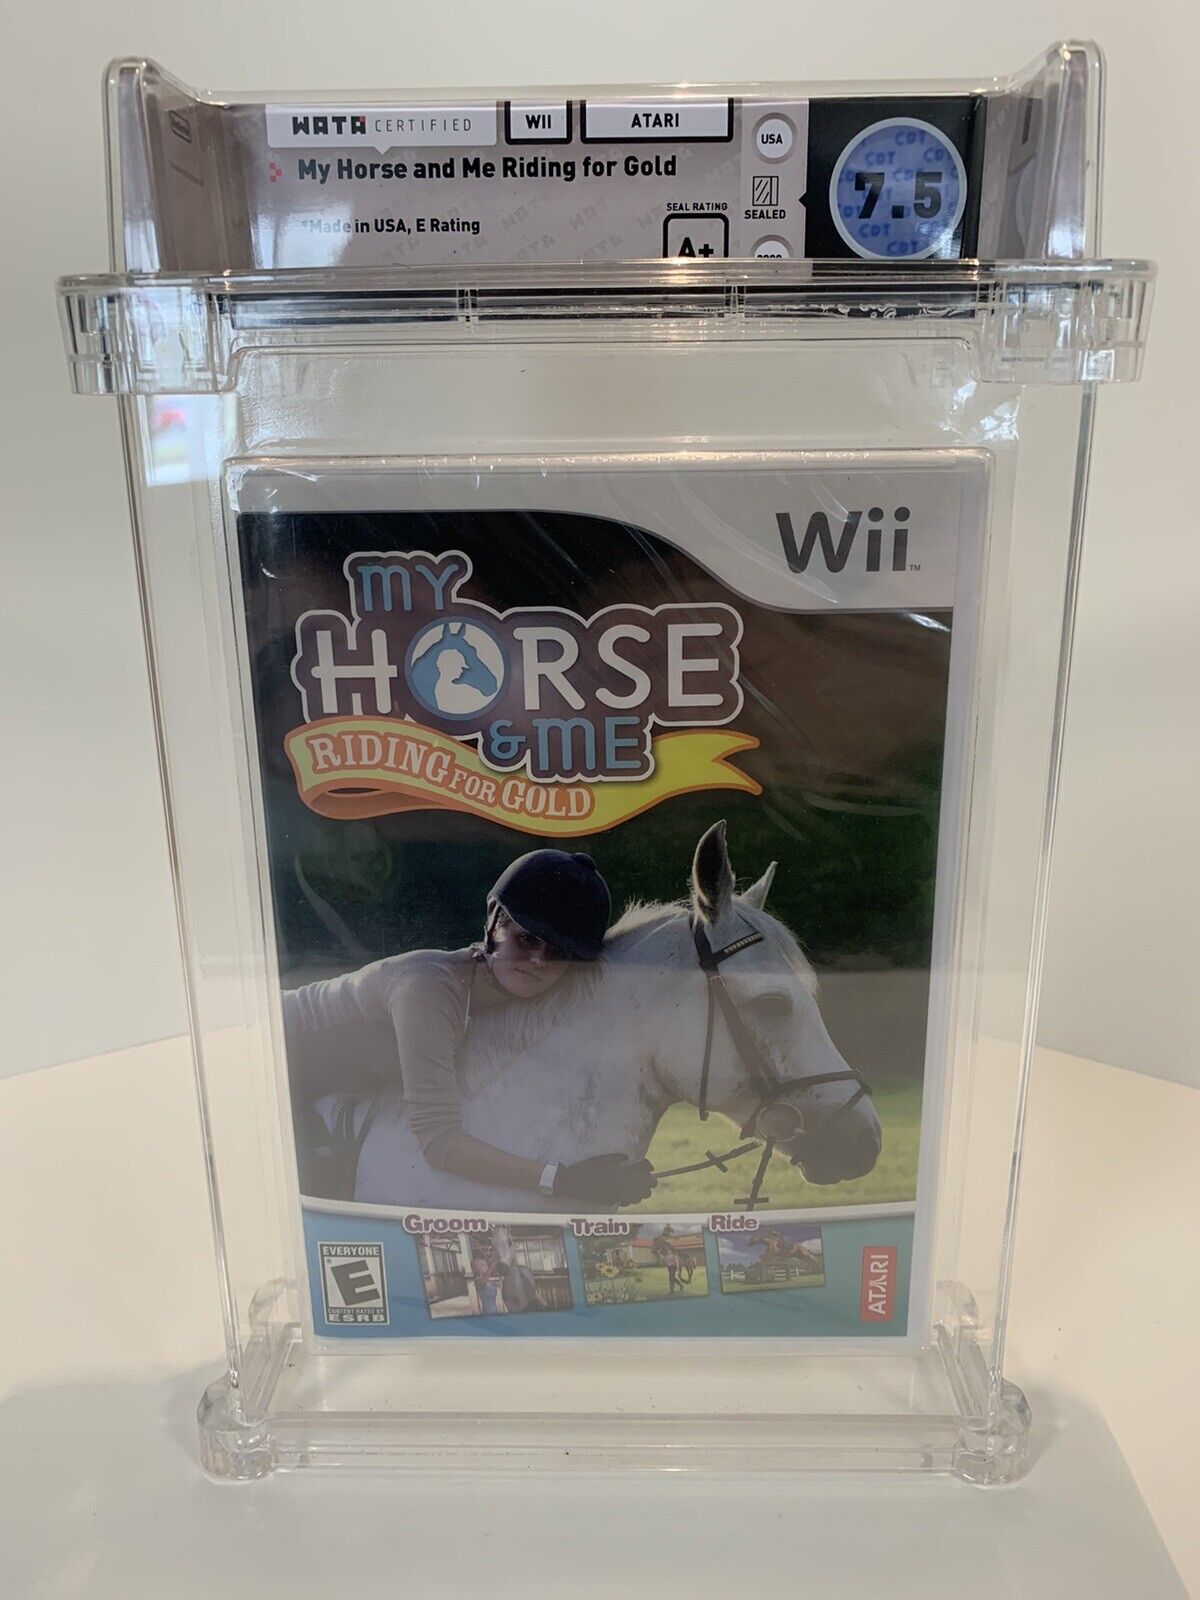 My Horse & Me: Riding for Gold Wii WATA Graded 7.5 POP 1 Holy Grail